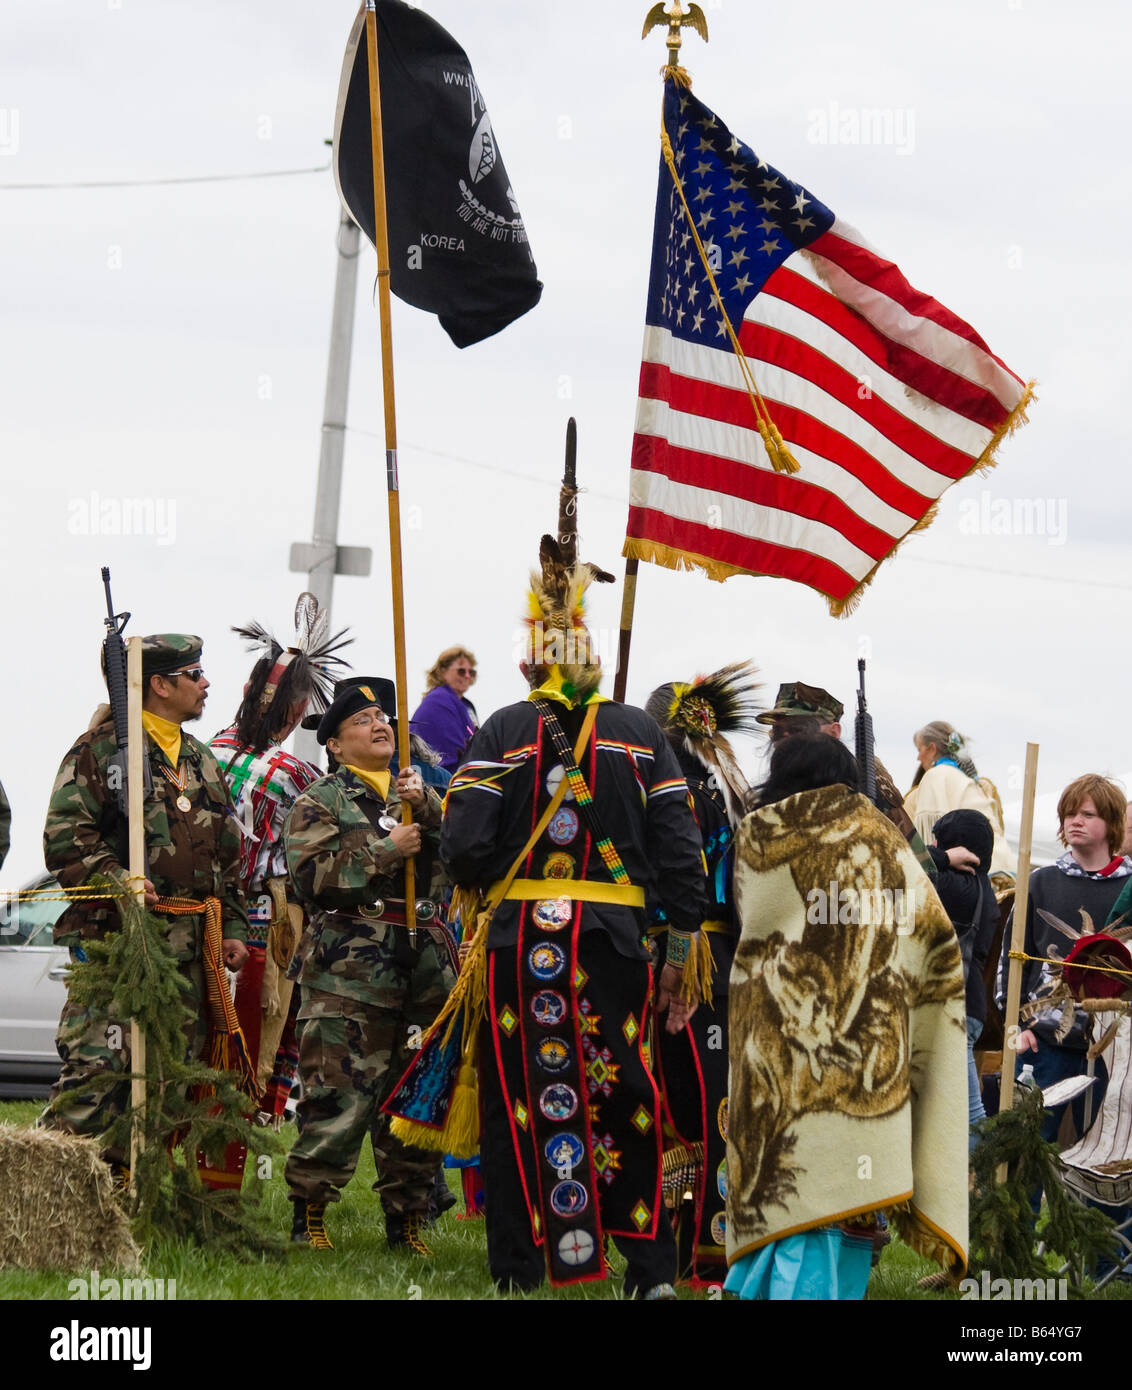 Native Americans at the Healing Horse Spirit PowWow in Mt. Airy, Maryland carry an American flag POW-MIA flag. Stock Photo